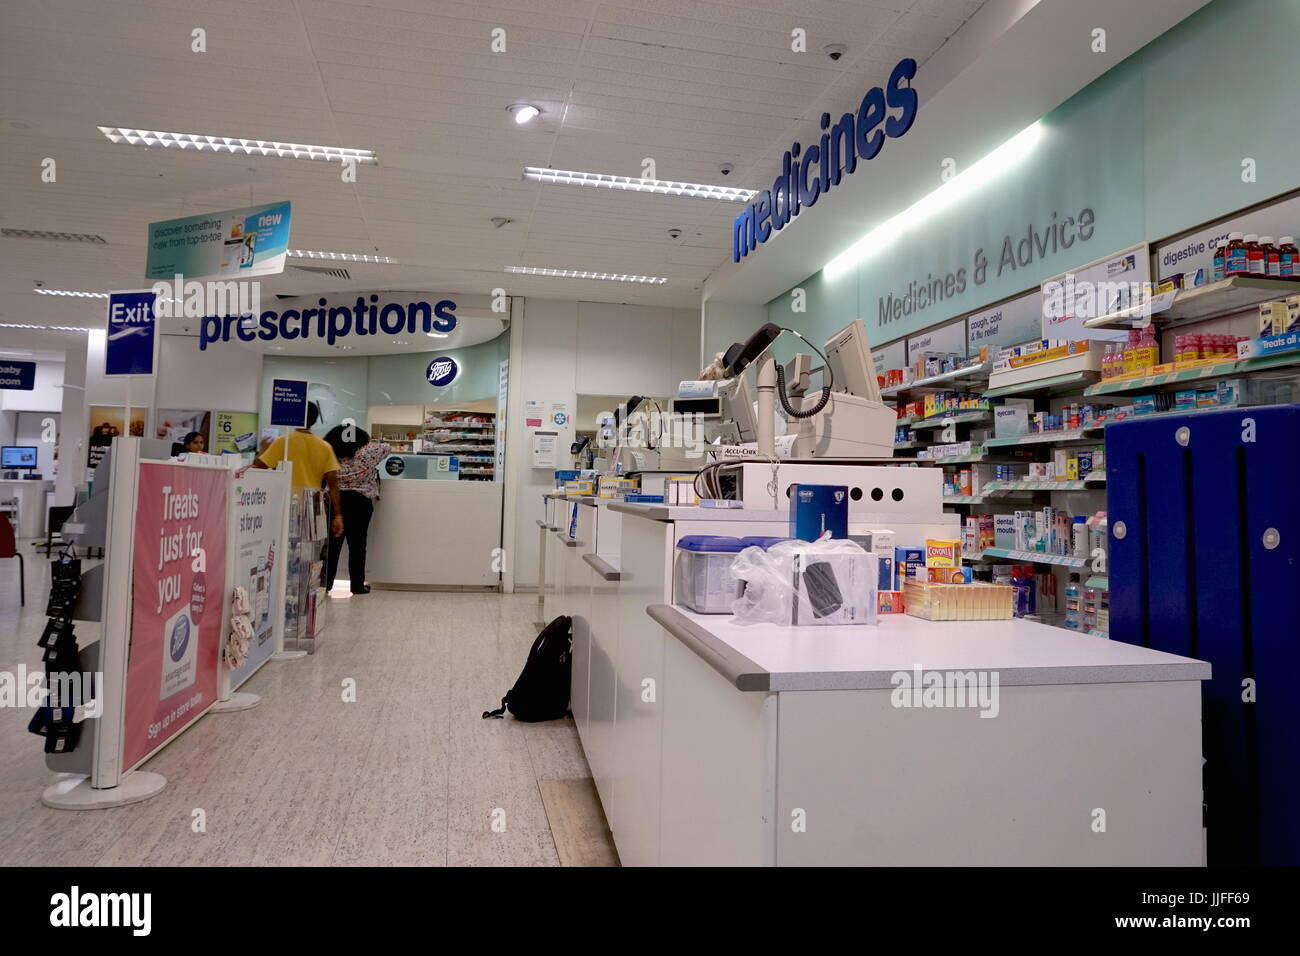 Boots Pharmacy Interior High Resolution Stock Photography and Images - Alamy